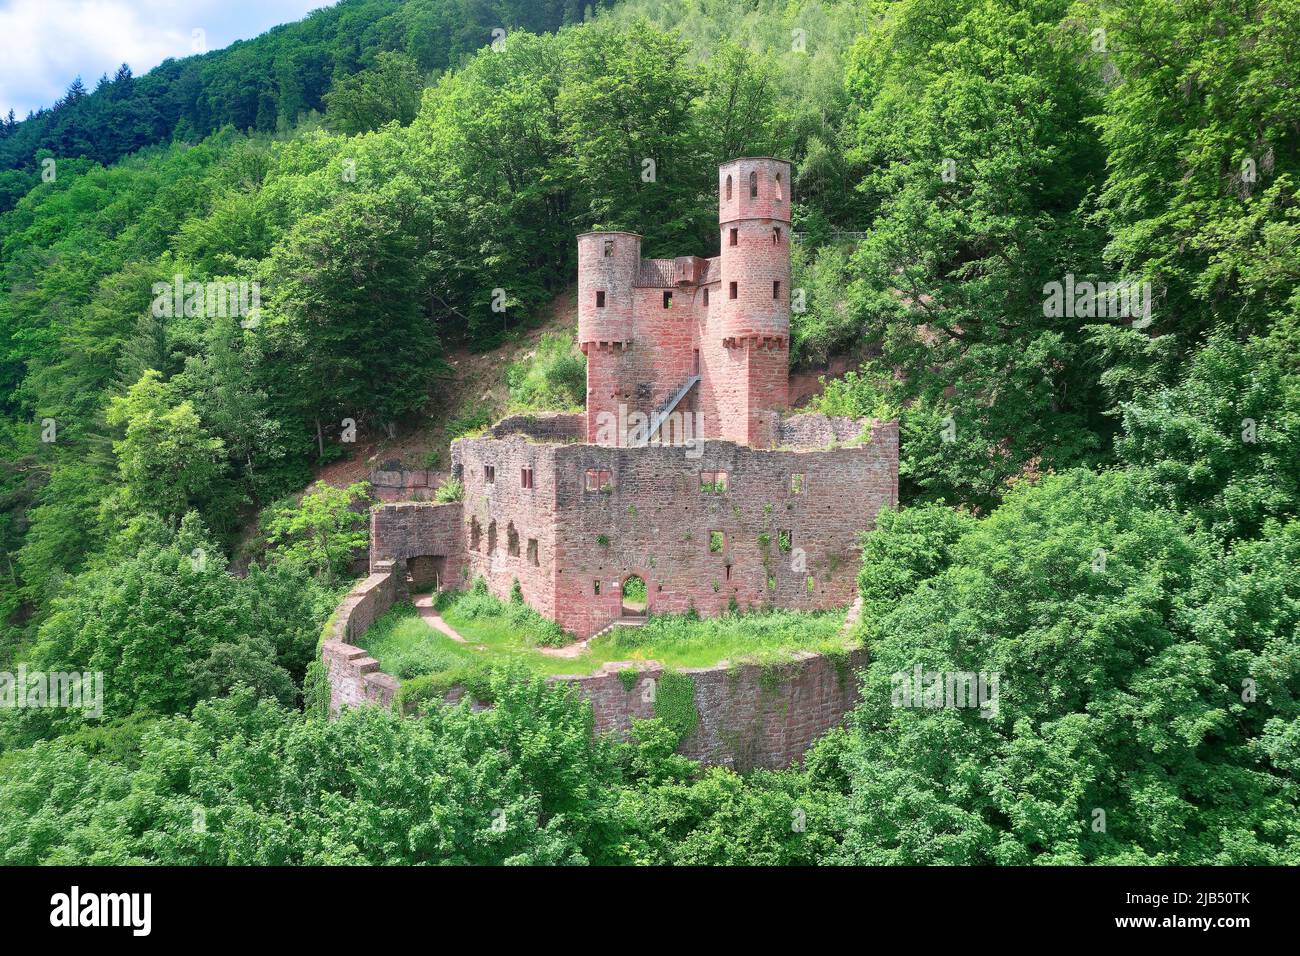 Aerial view, Schadeck Castle, also known as Swallow's Nest, ruin of a medieval hillside castle on a rocky site at 190 utricularia ochroleuca (ue.) Stock Photo